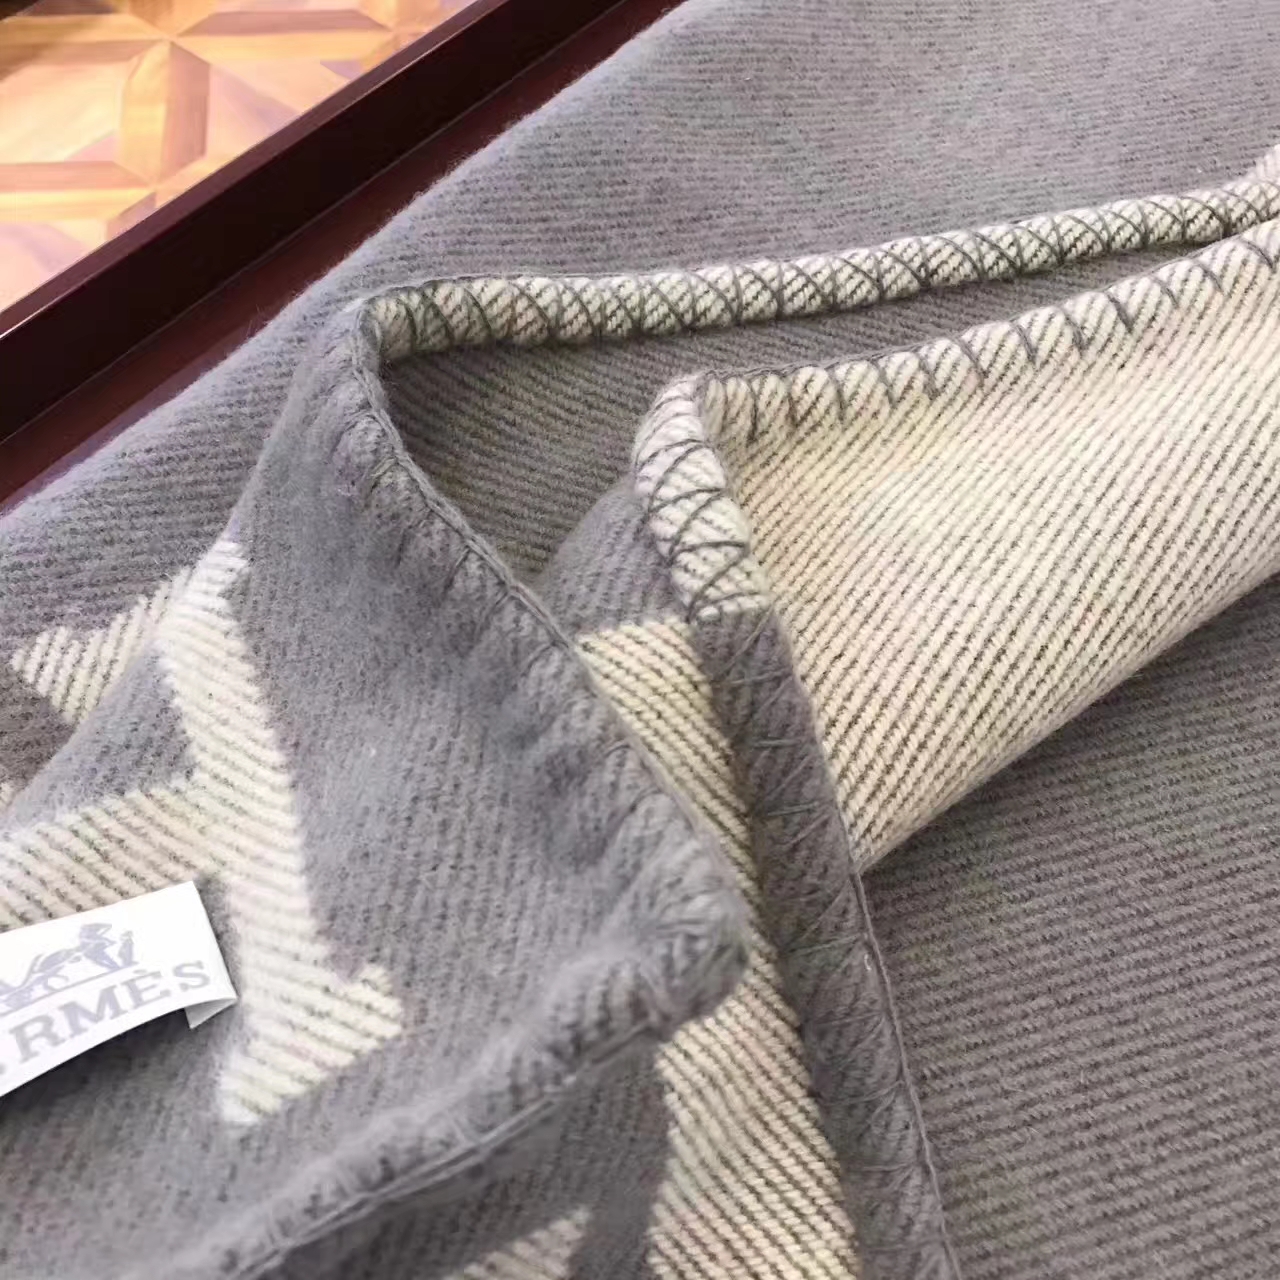 New Arrival Hermes Cashmere H Printing Blanket140*160cm in Grey